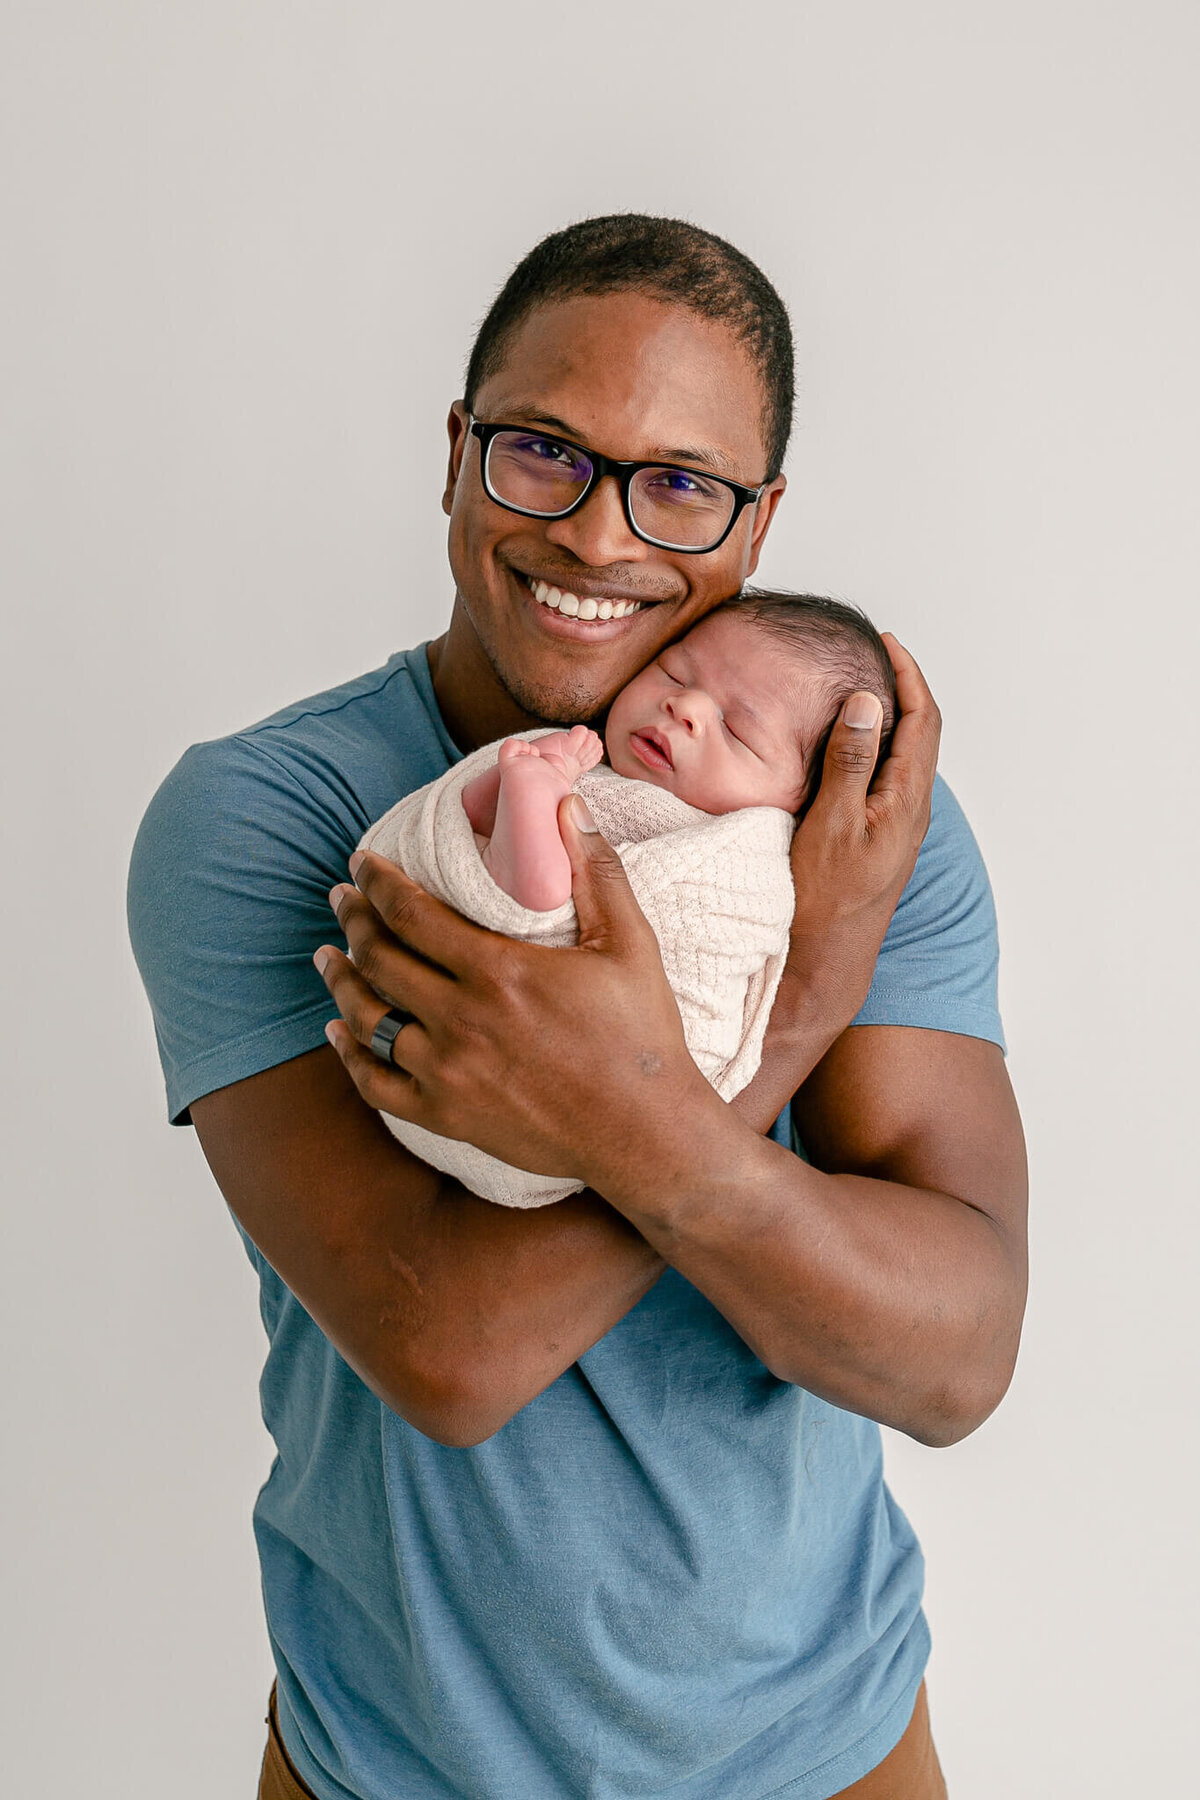 Dad with glasses wearing a blue t-shirt is holding baby in his arms with baby up close to his cheek. Baby is sleeping and wrapped in a beige wrap with his little toes peeking out. Dad is smiling proudly at the camera.